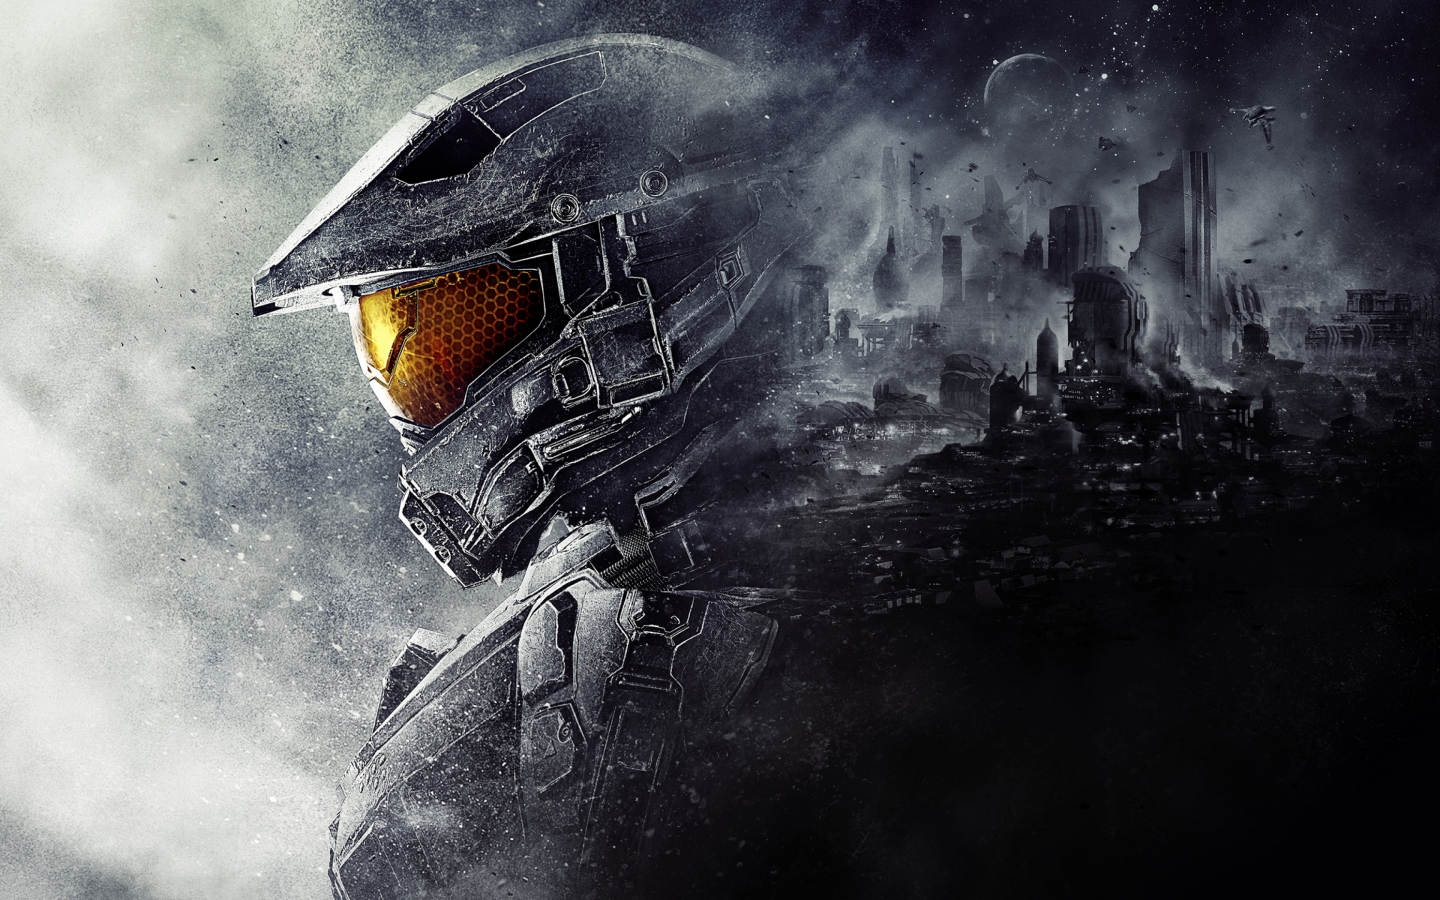 halo 5 guardians 343 industries master chief 105941 3840x2400